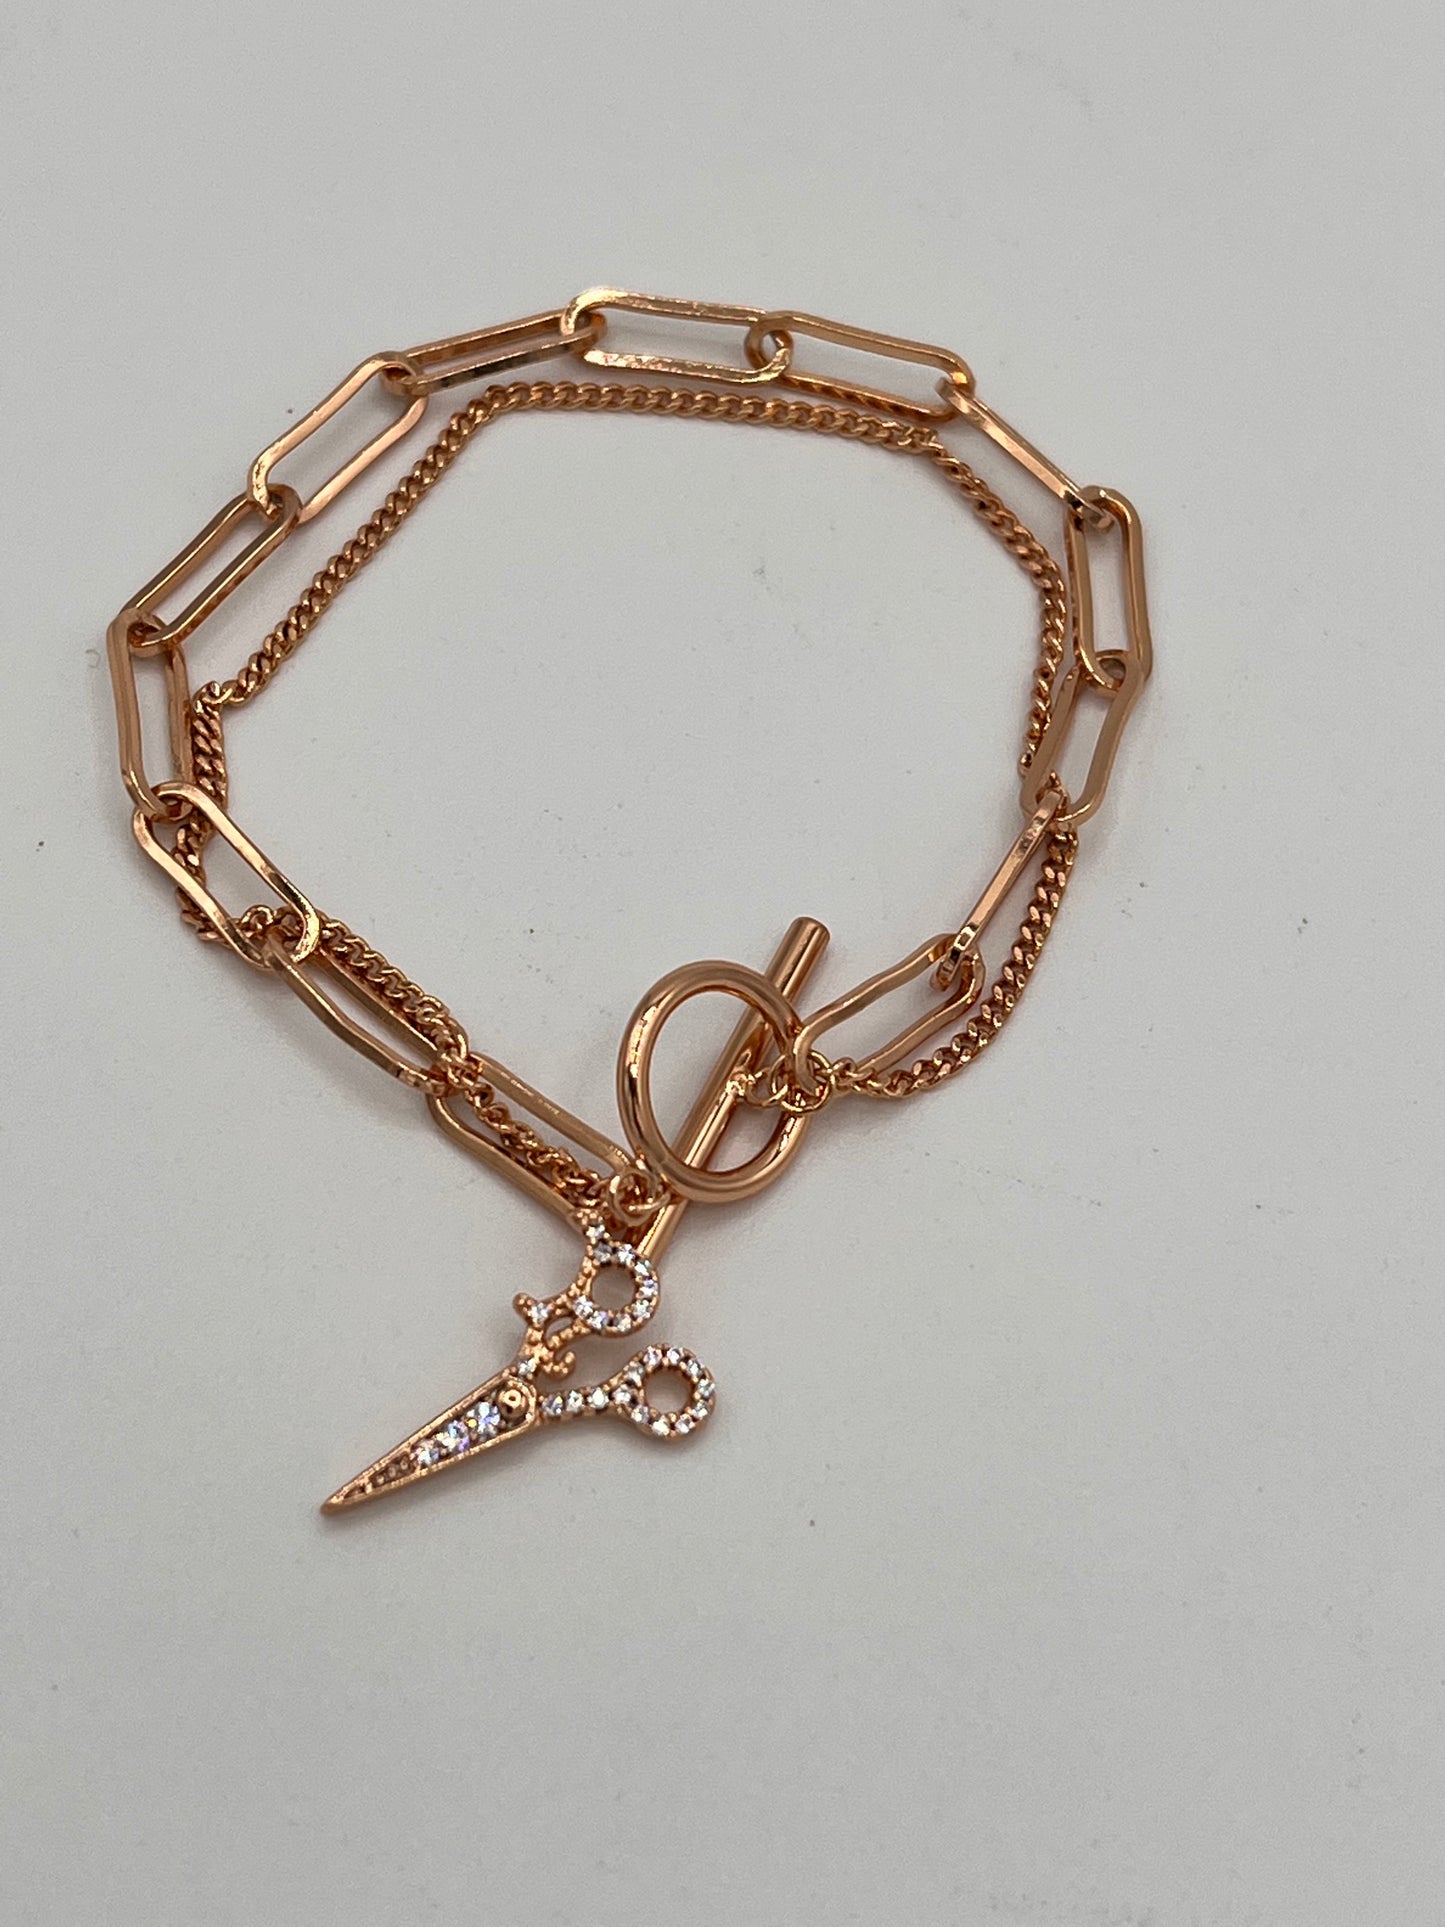 Clip Chain Gold Plated Bracelet With Pair Of Scissors Charm